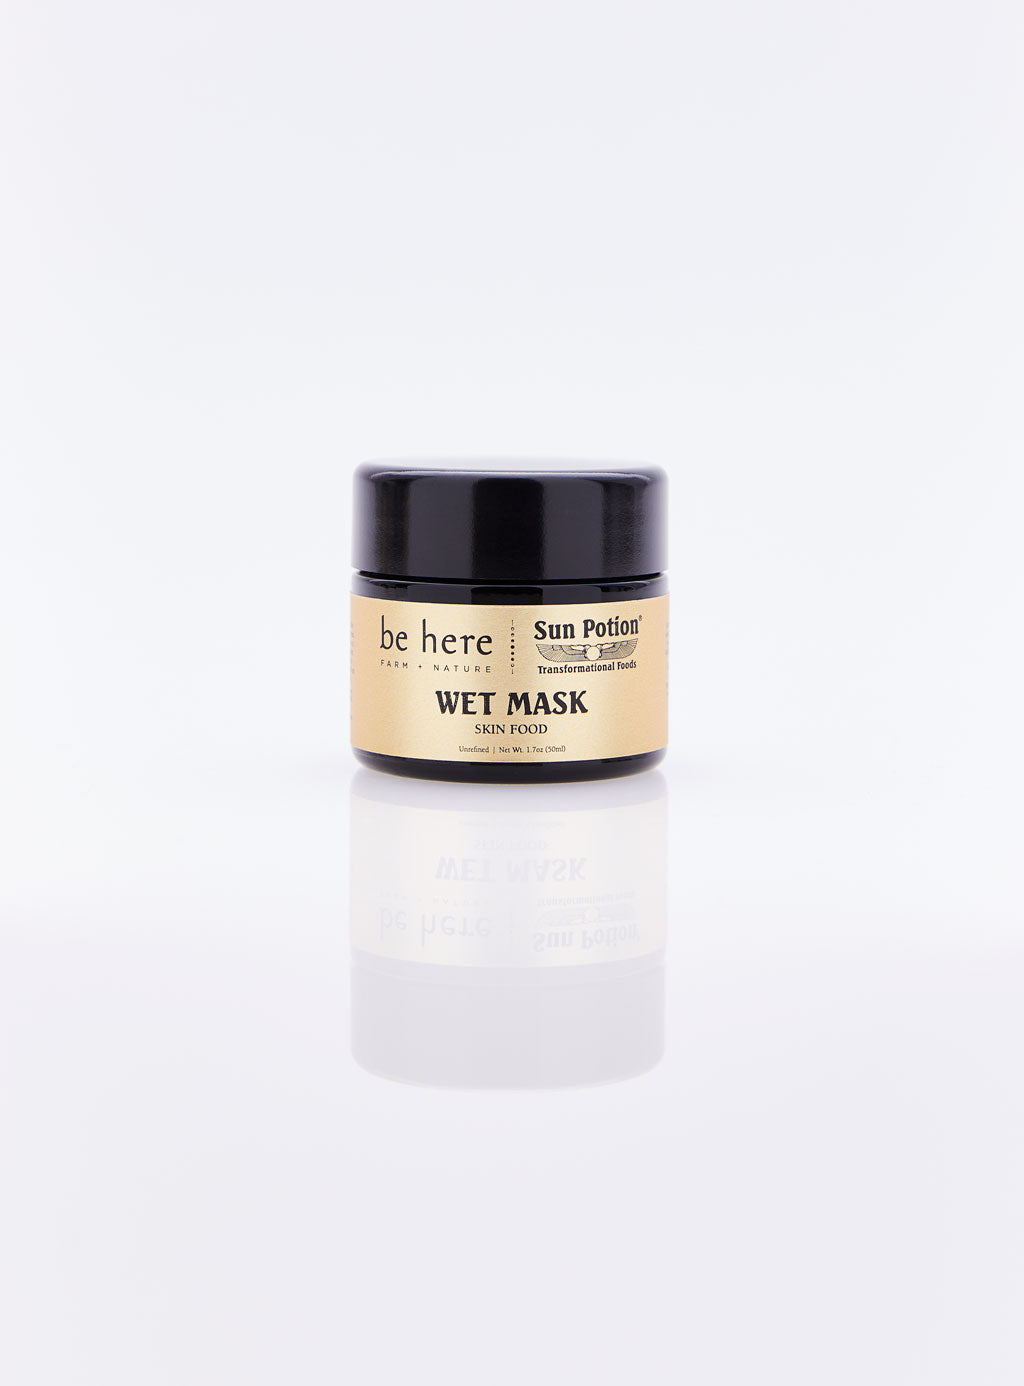 Be Here Farm + Nature Wet Mask "Skin Food"